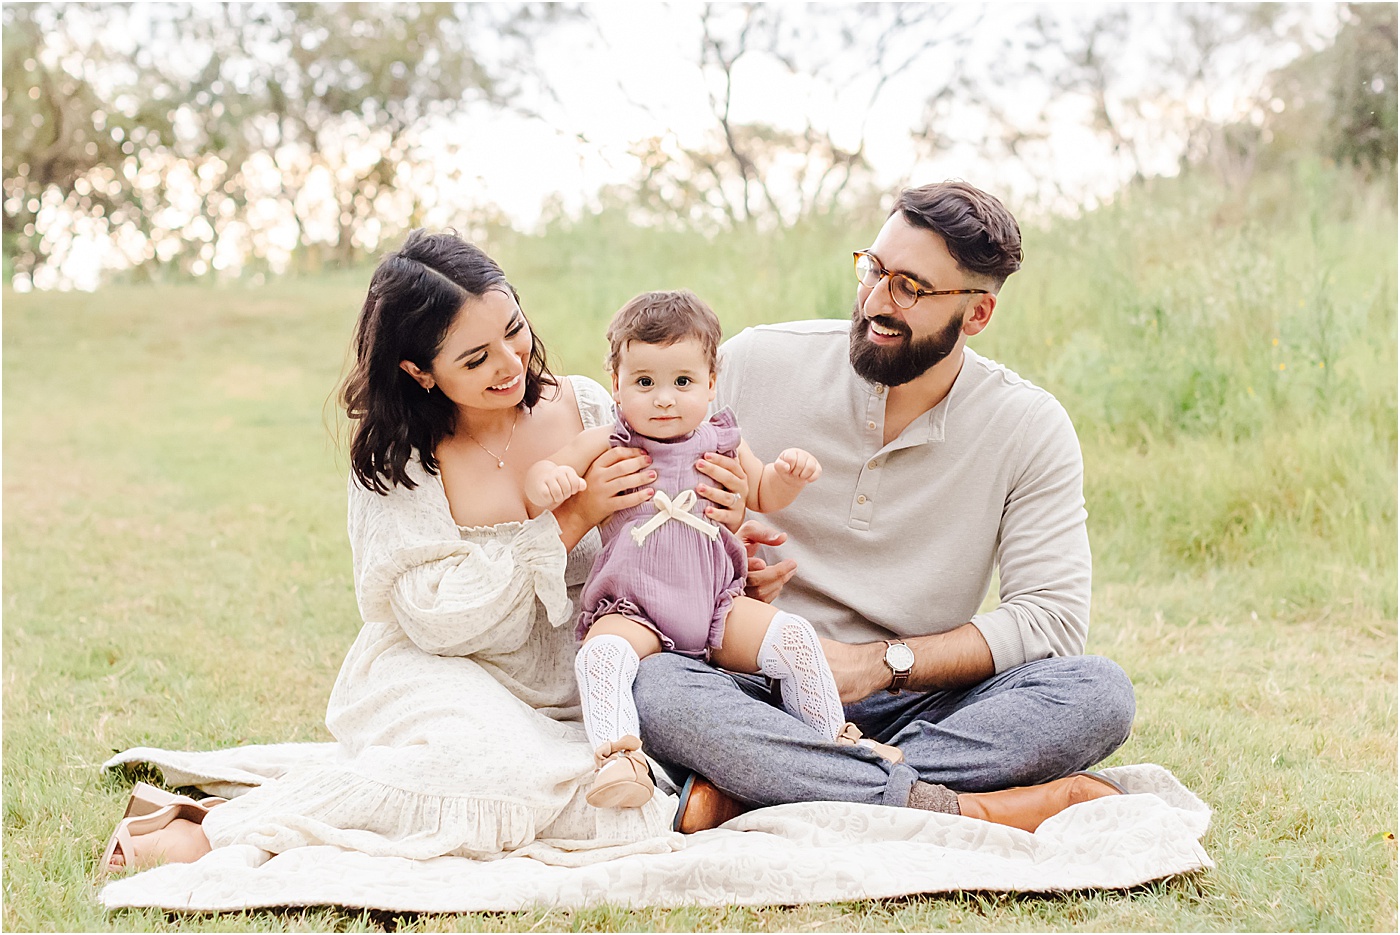 Mom and Dad sitting with daughter and smiling at her during Fall family session with Sana Ahmed Photography.